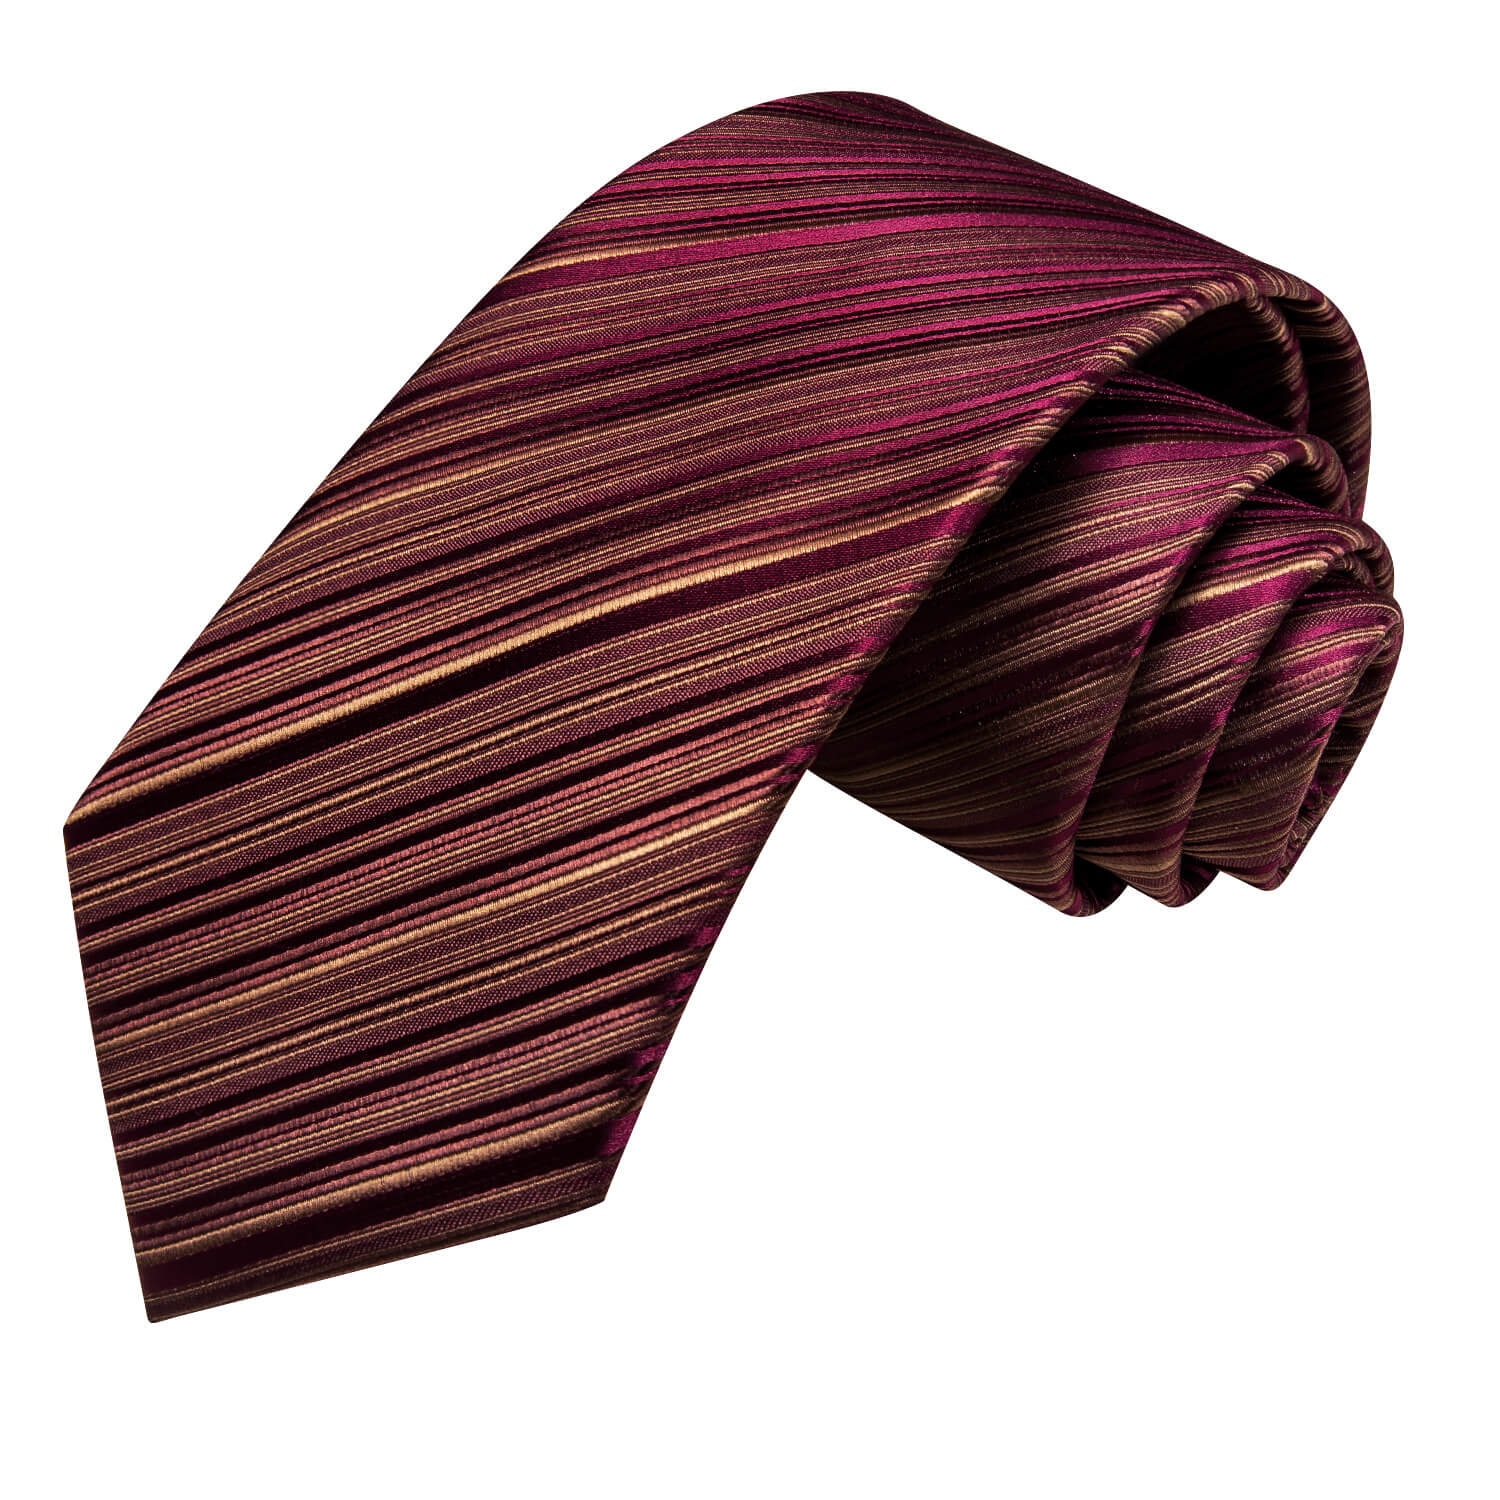 Hi-Tie Striped Wine Red Tie with Pocket Square and Cufflinks